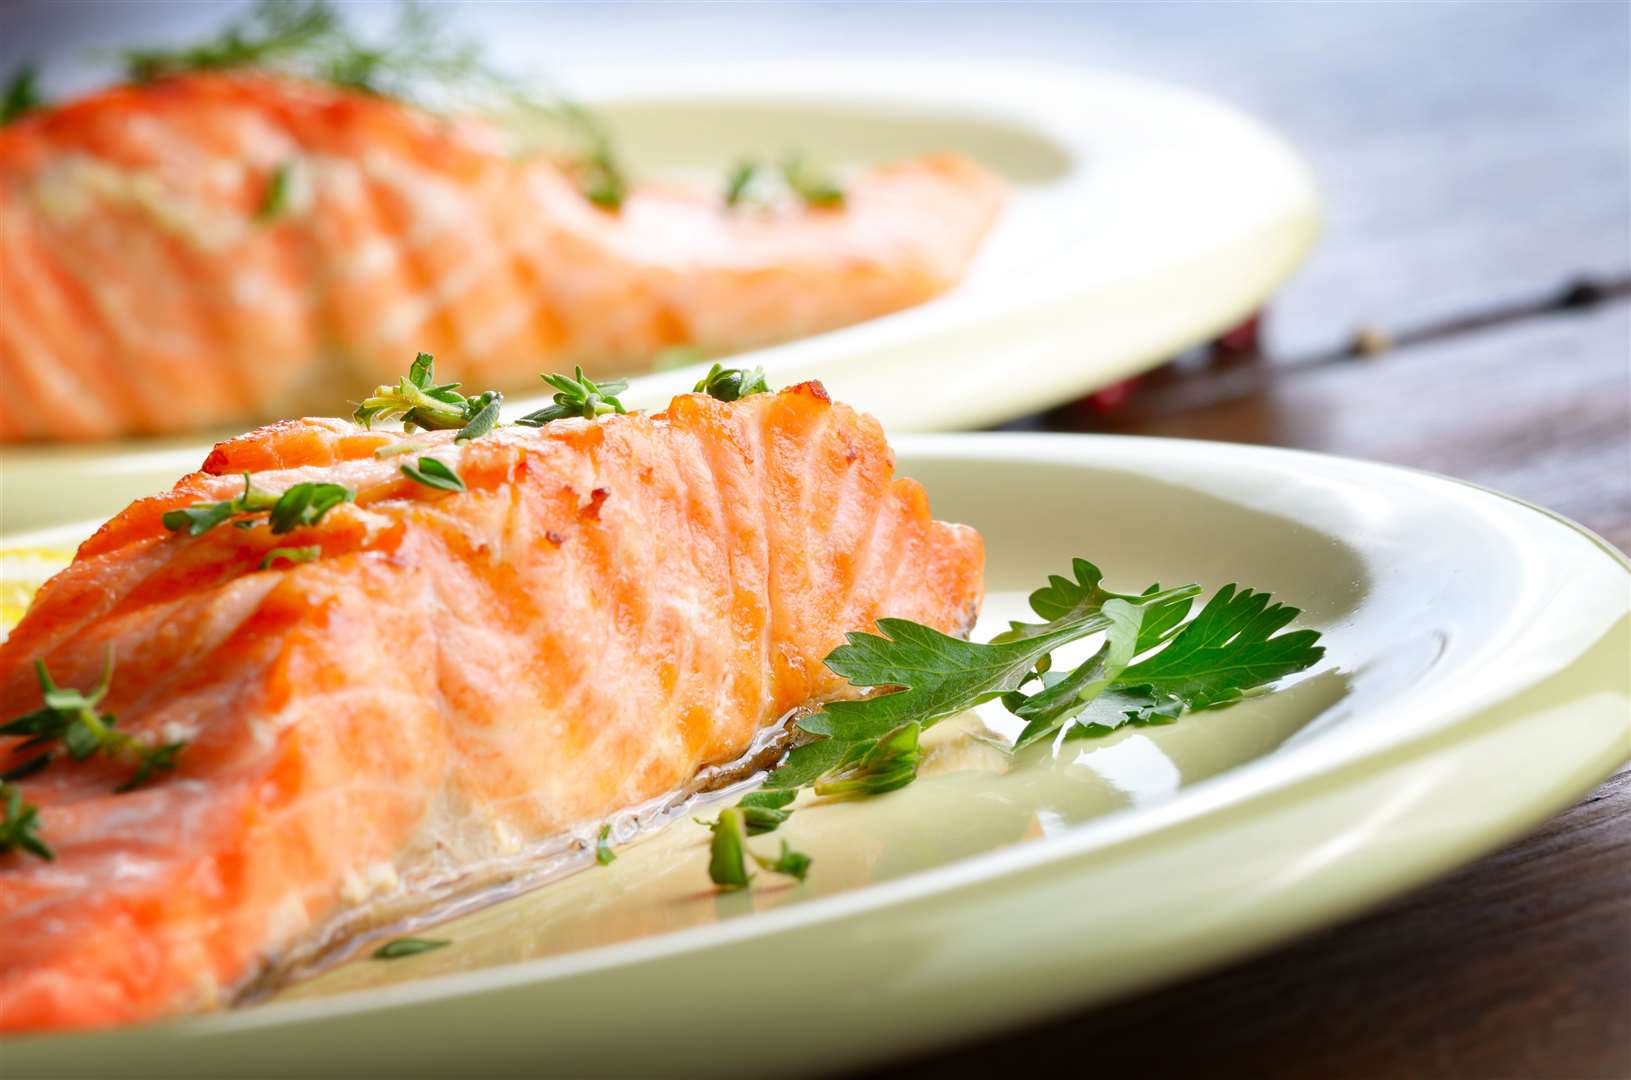 Scottish salmon is now being enjoyed in 52 markets worldwide.